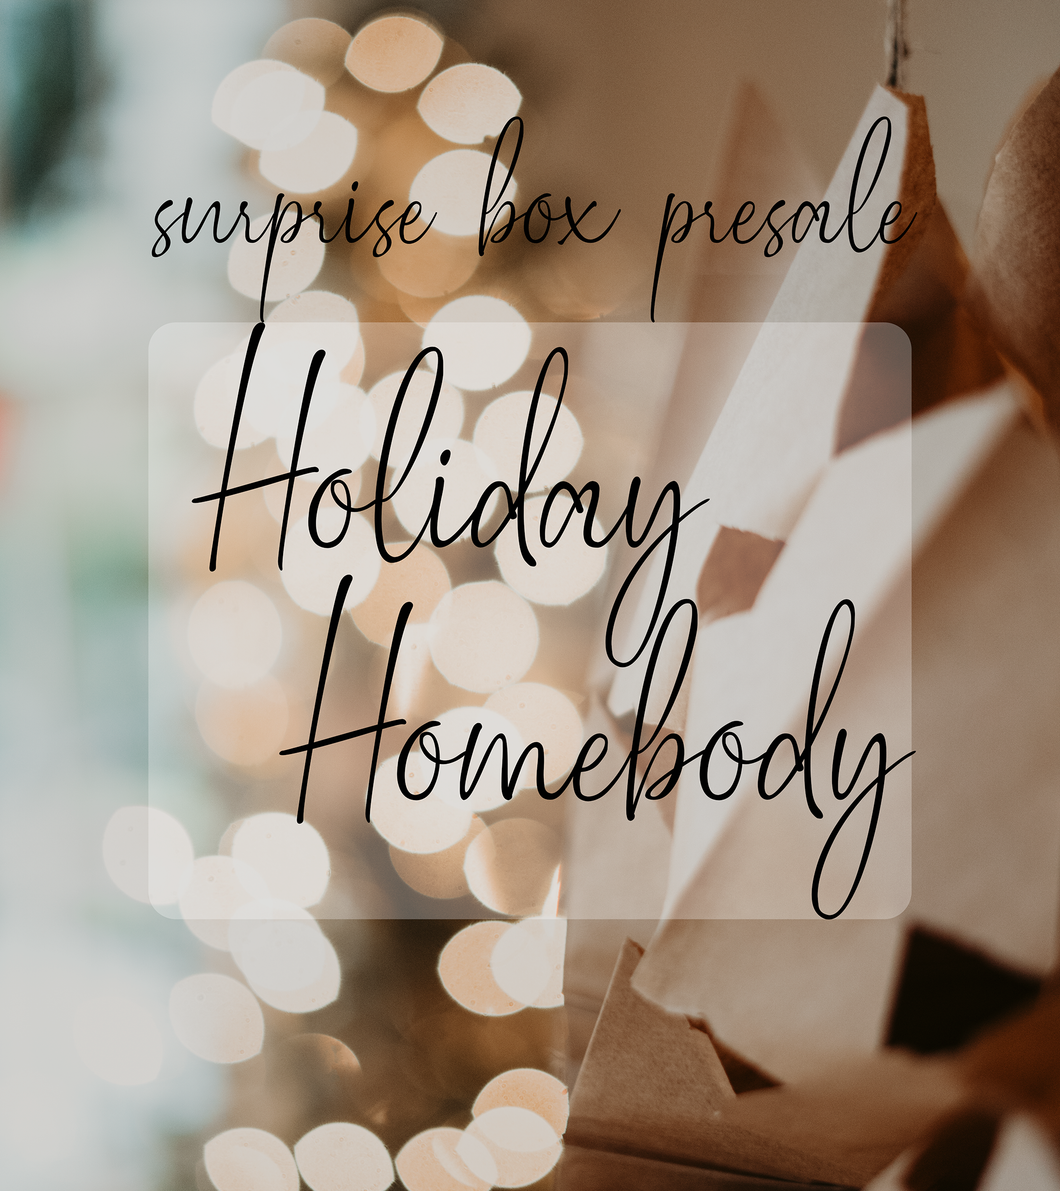 Holiday Homebody Surprise Box